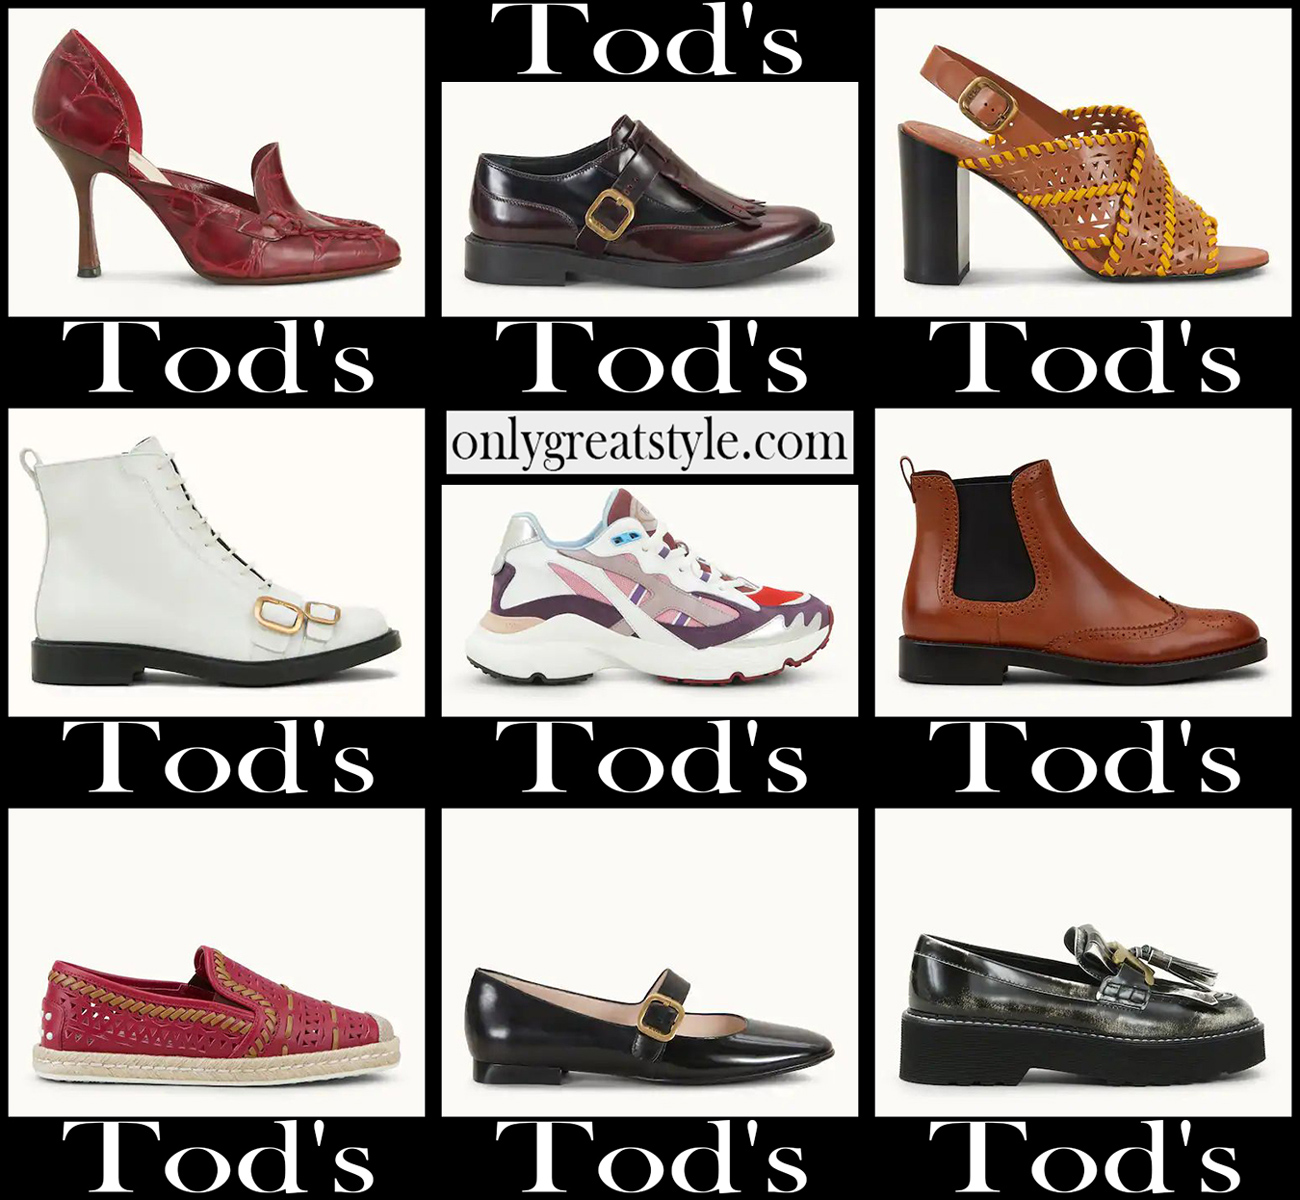 Tods shoes 2021 new arrivals womens footwear